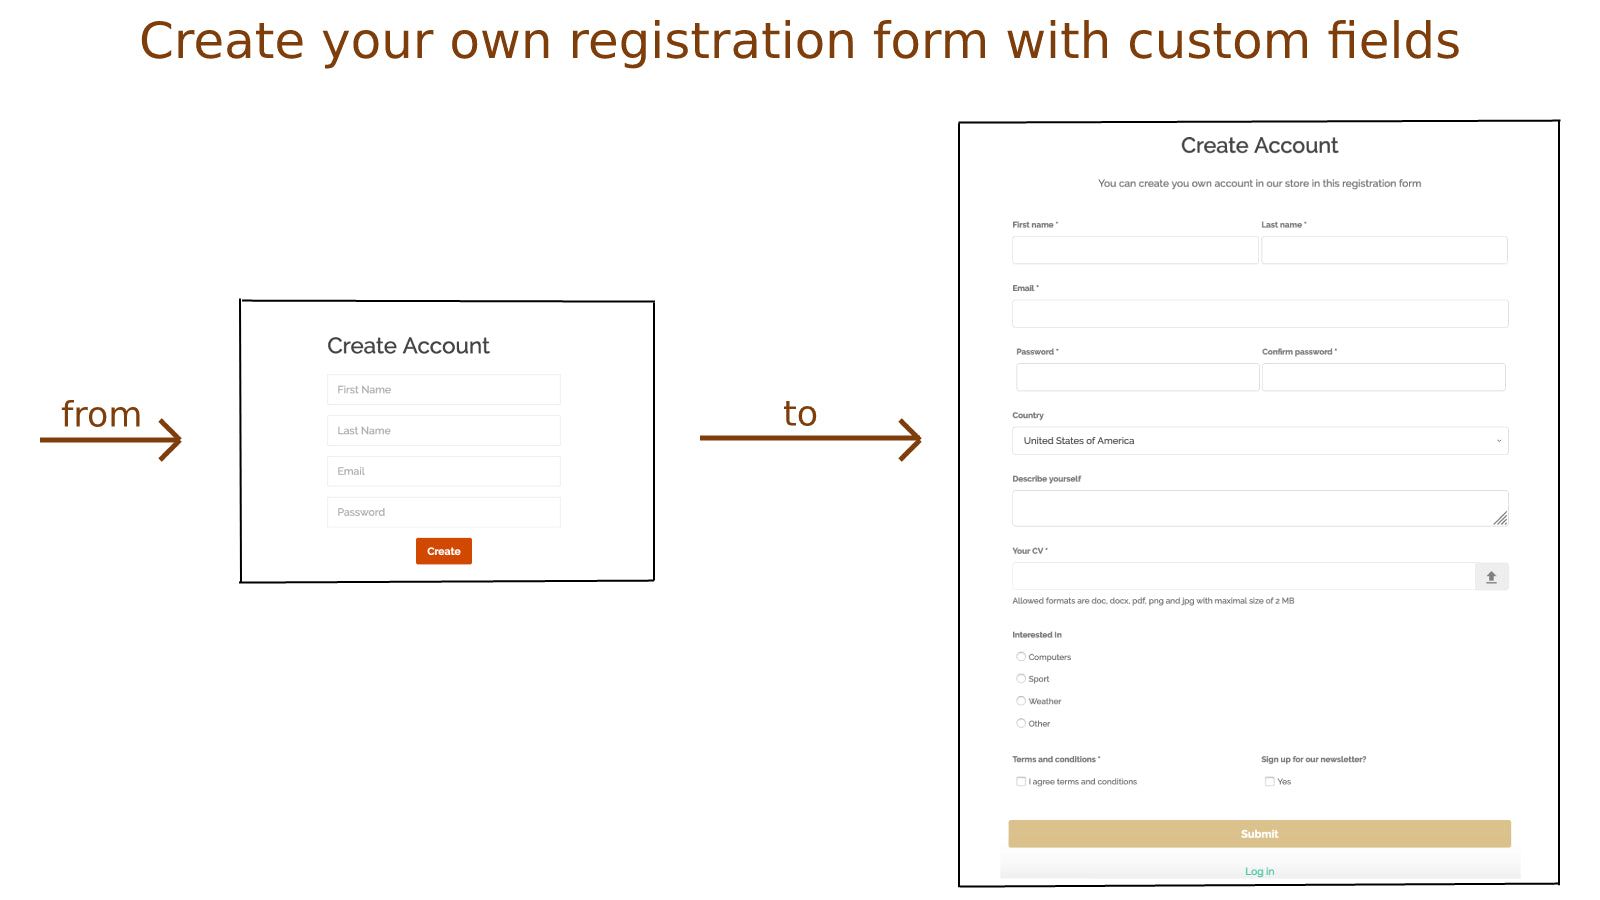 Create your own registration form with custom fields